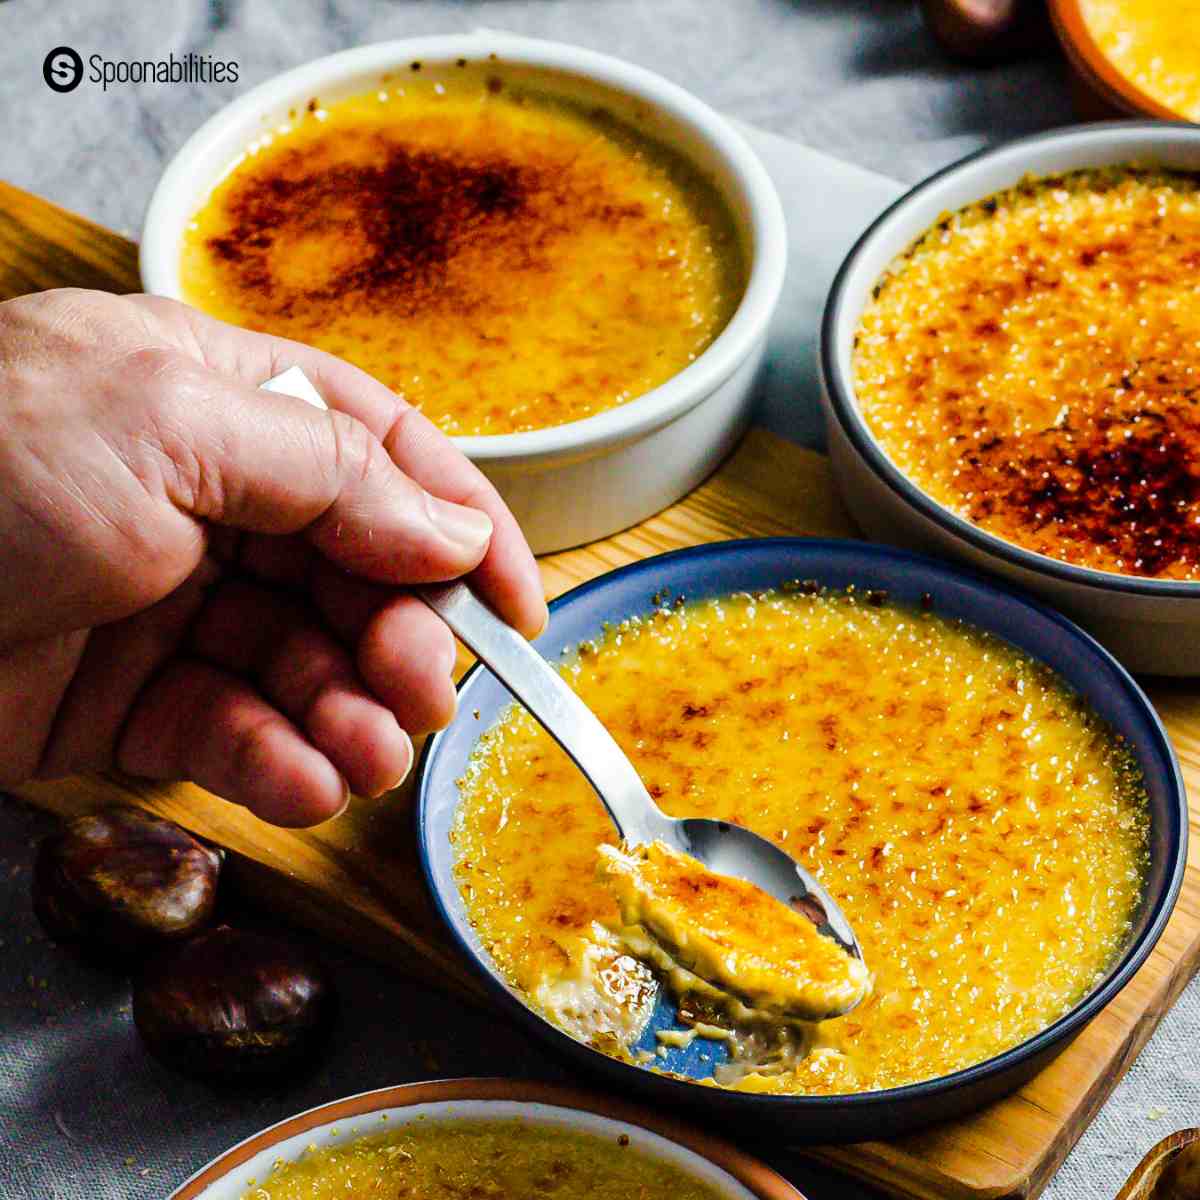 Scooping soft and creamy creme brulee from a blue baking dish